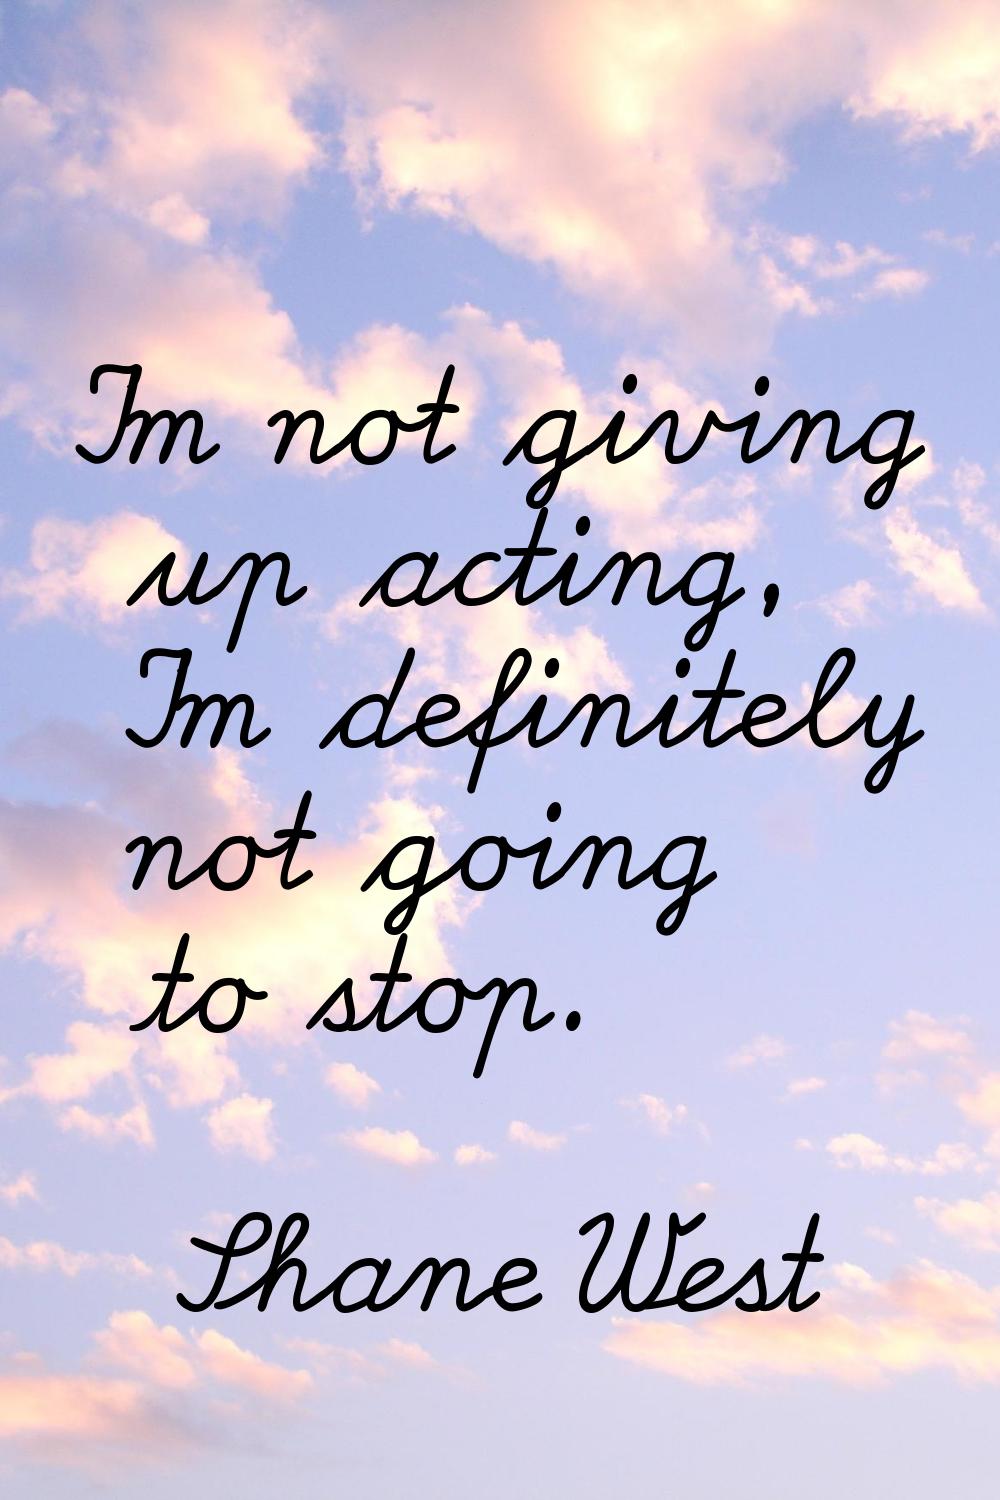 I'm not giving up acting, I'm definitely not going to stop.